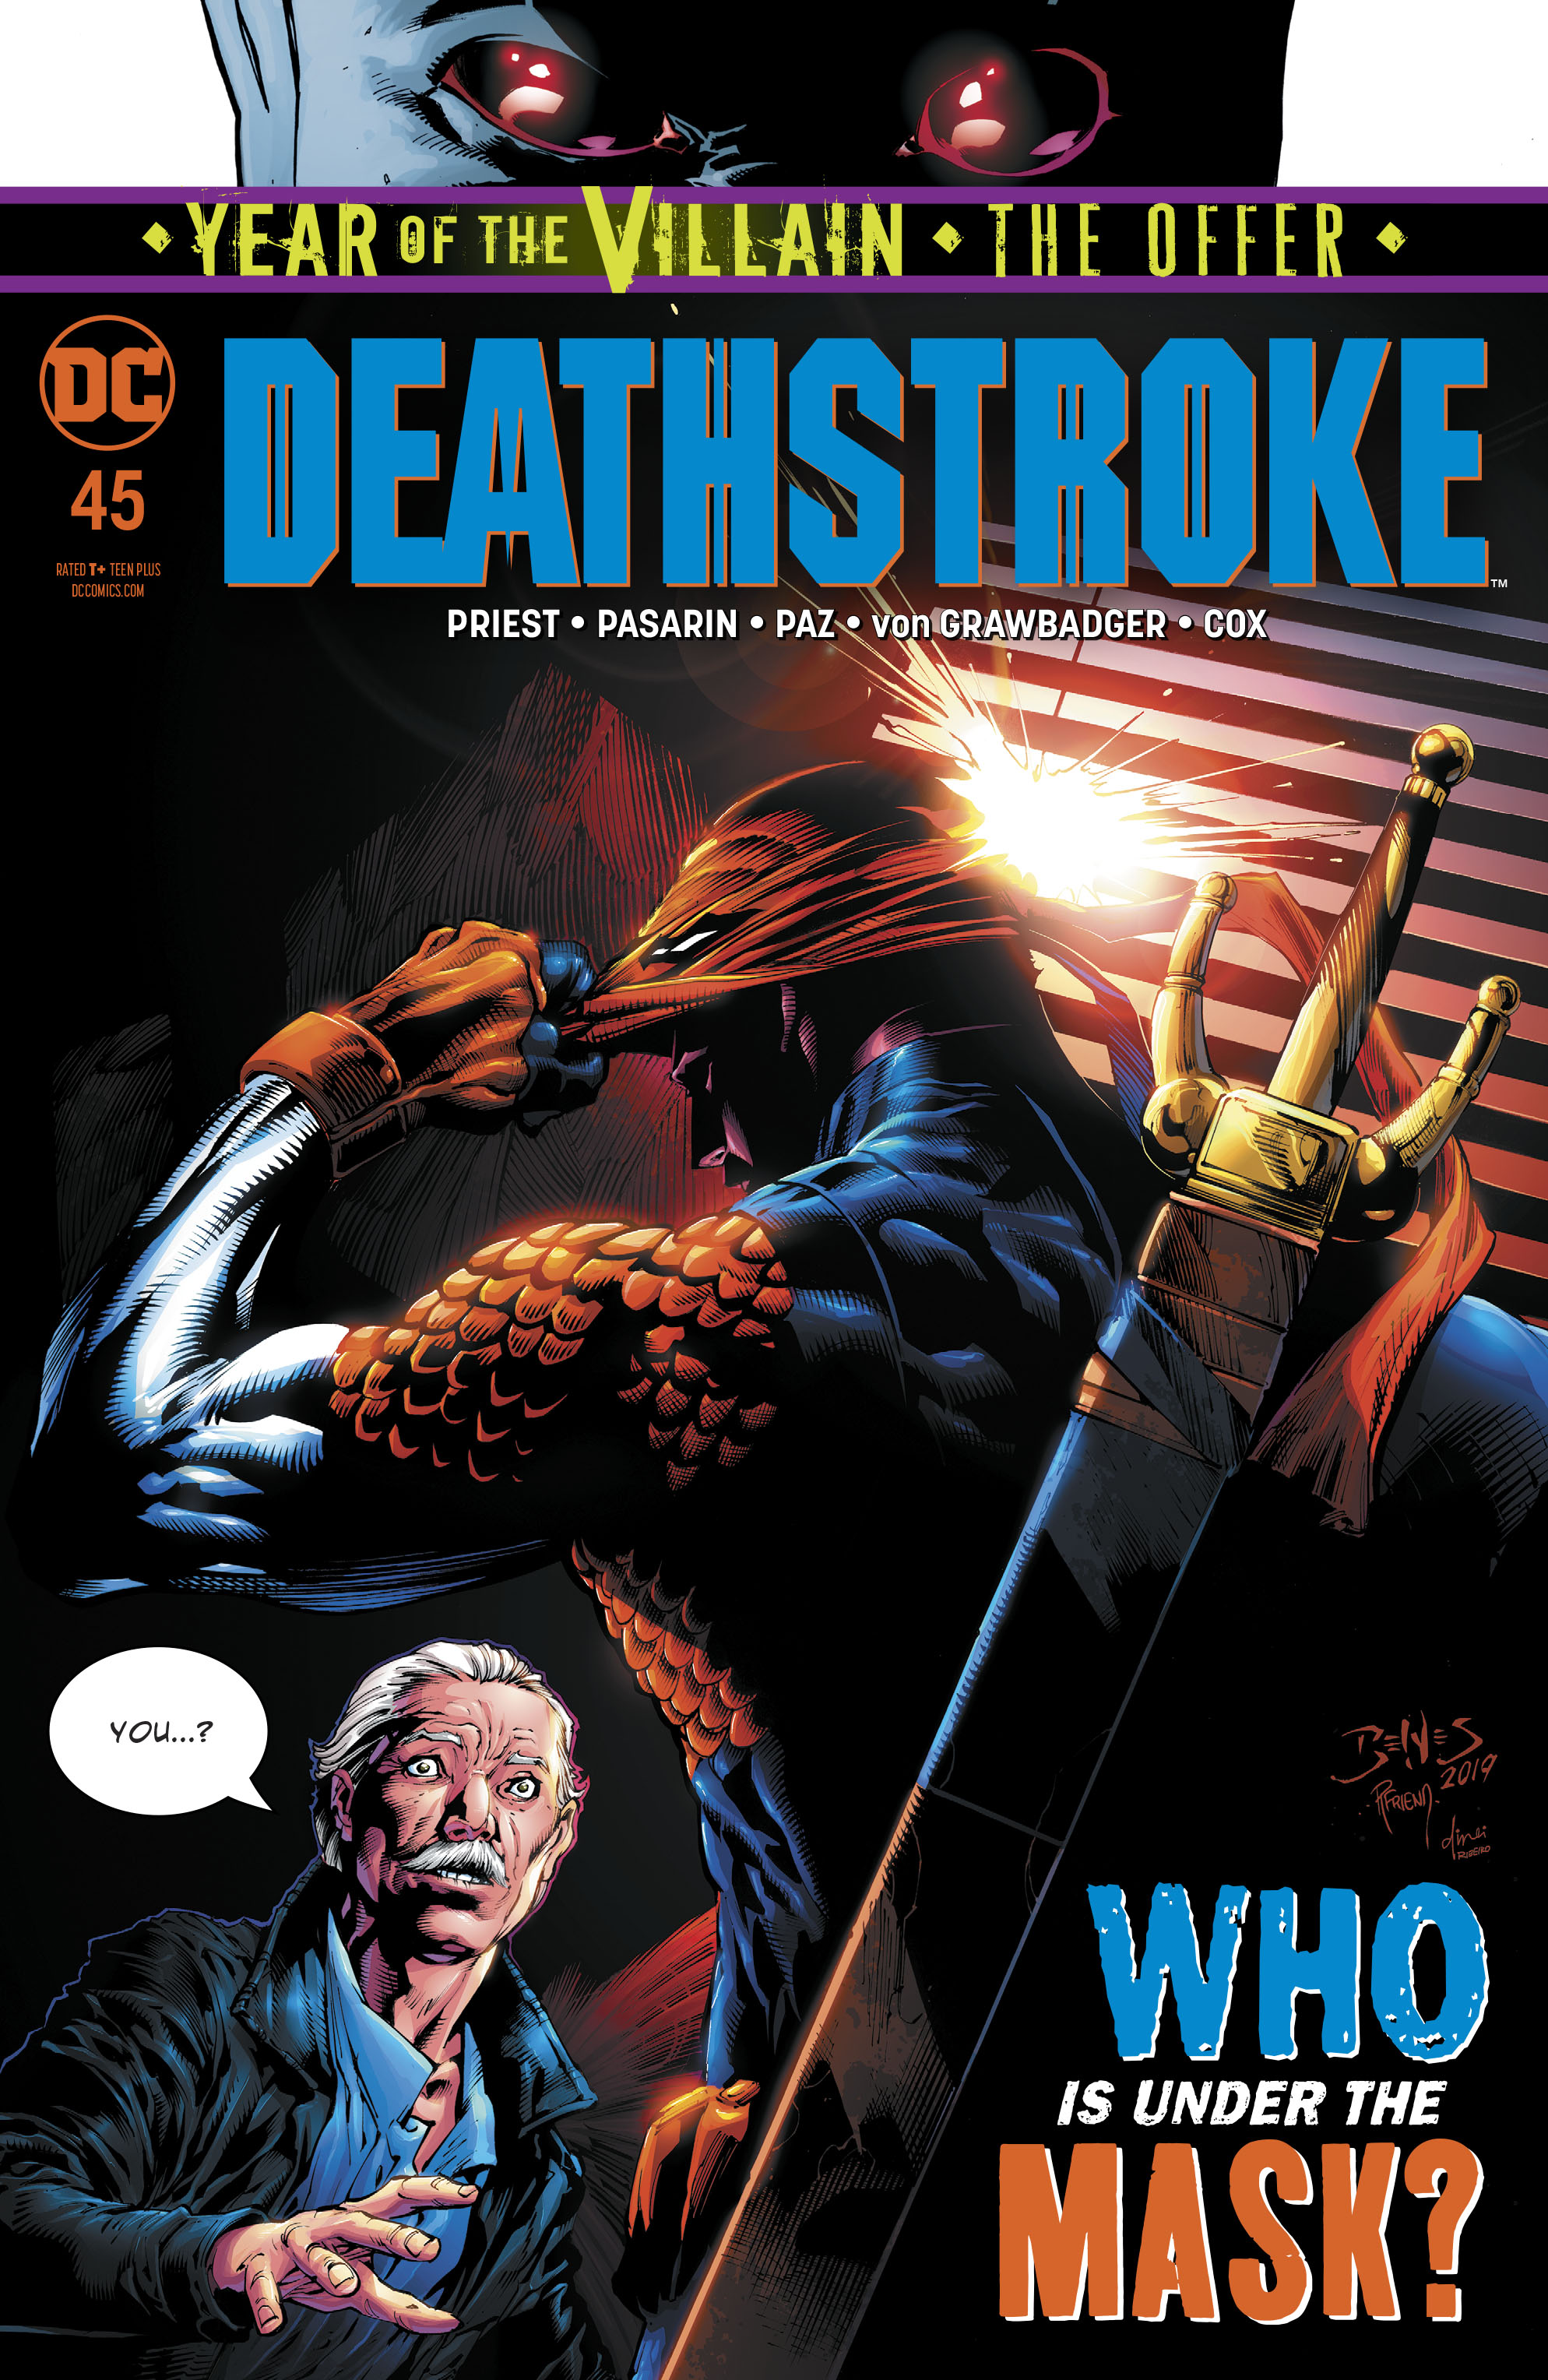 Deathstroke #45 Year of the Villain The Offer (2016)